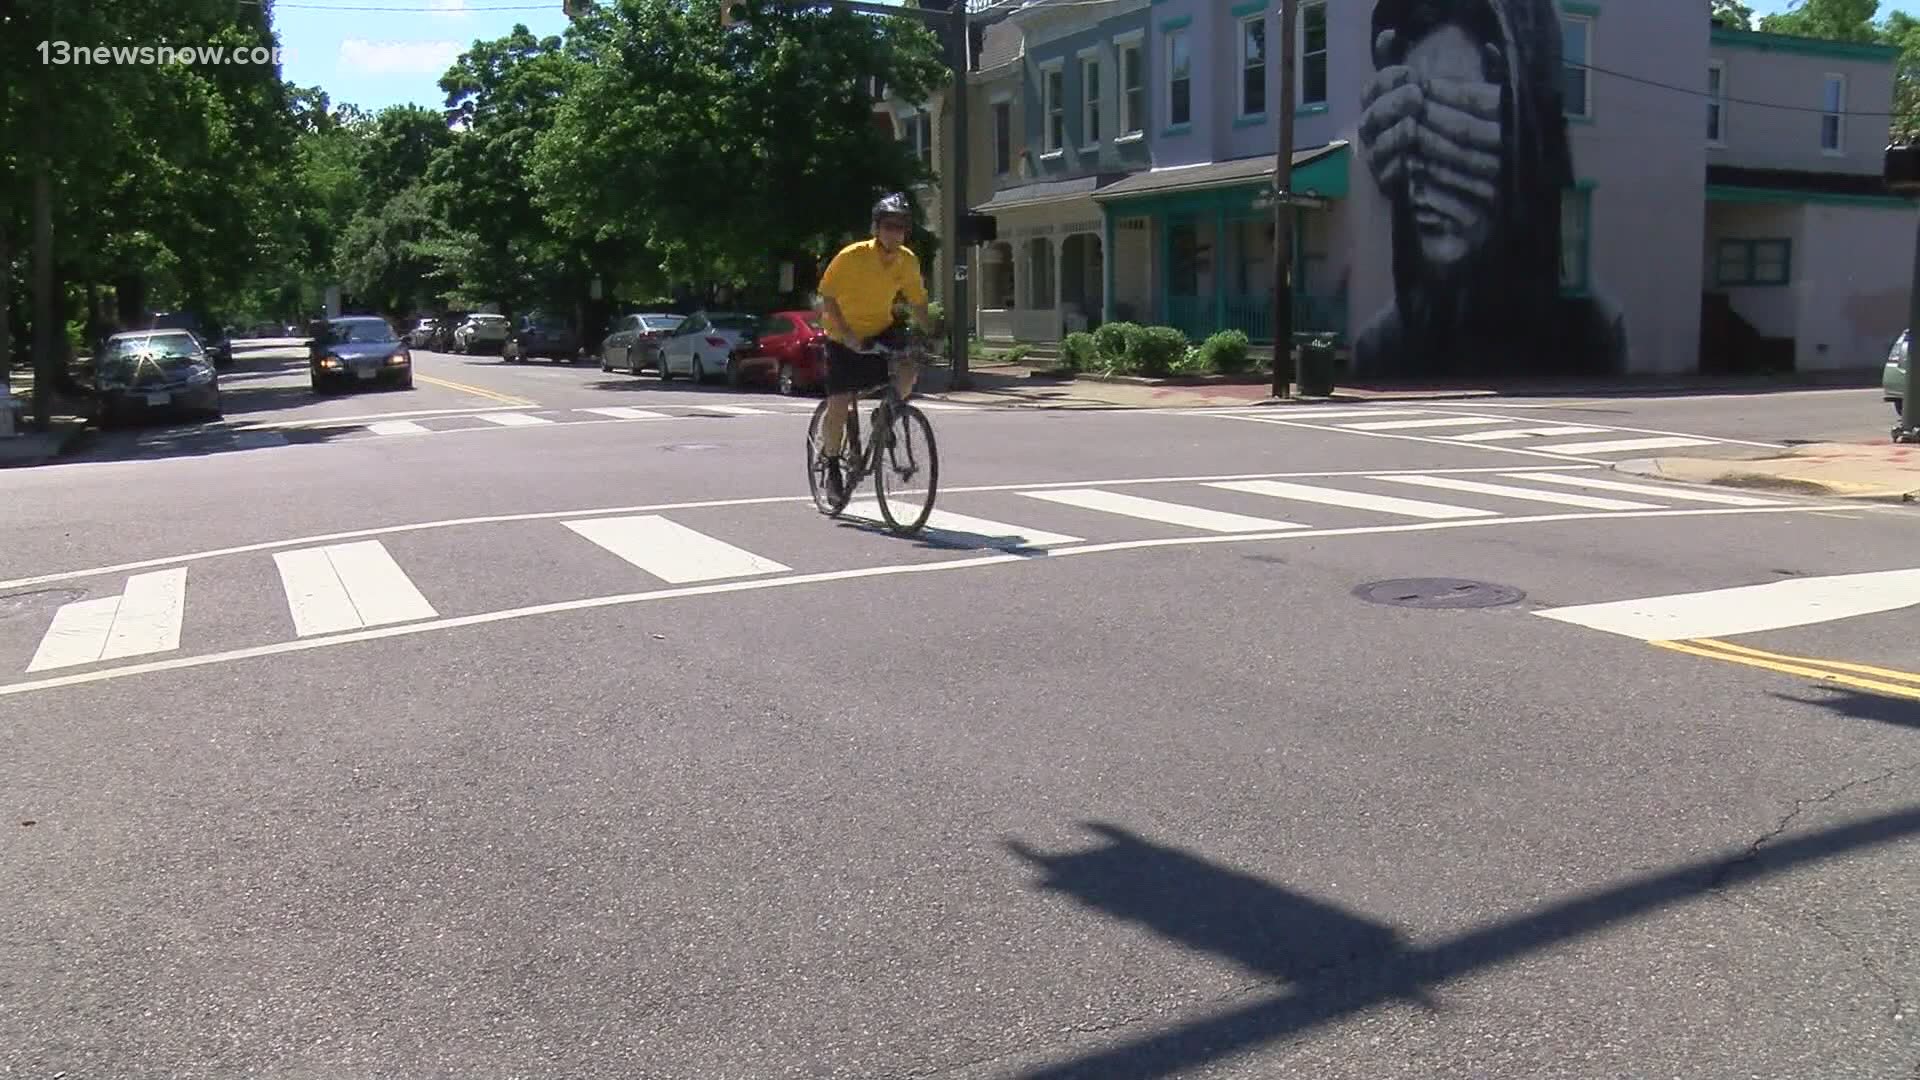 Starting July 1, drivers are required to change lanes to pass bike riders.